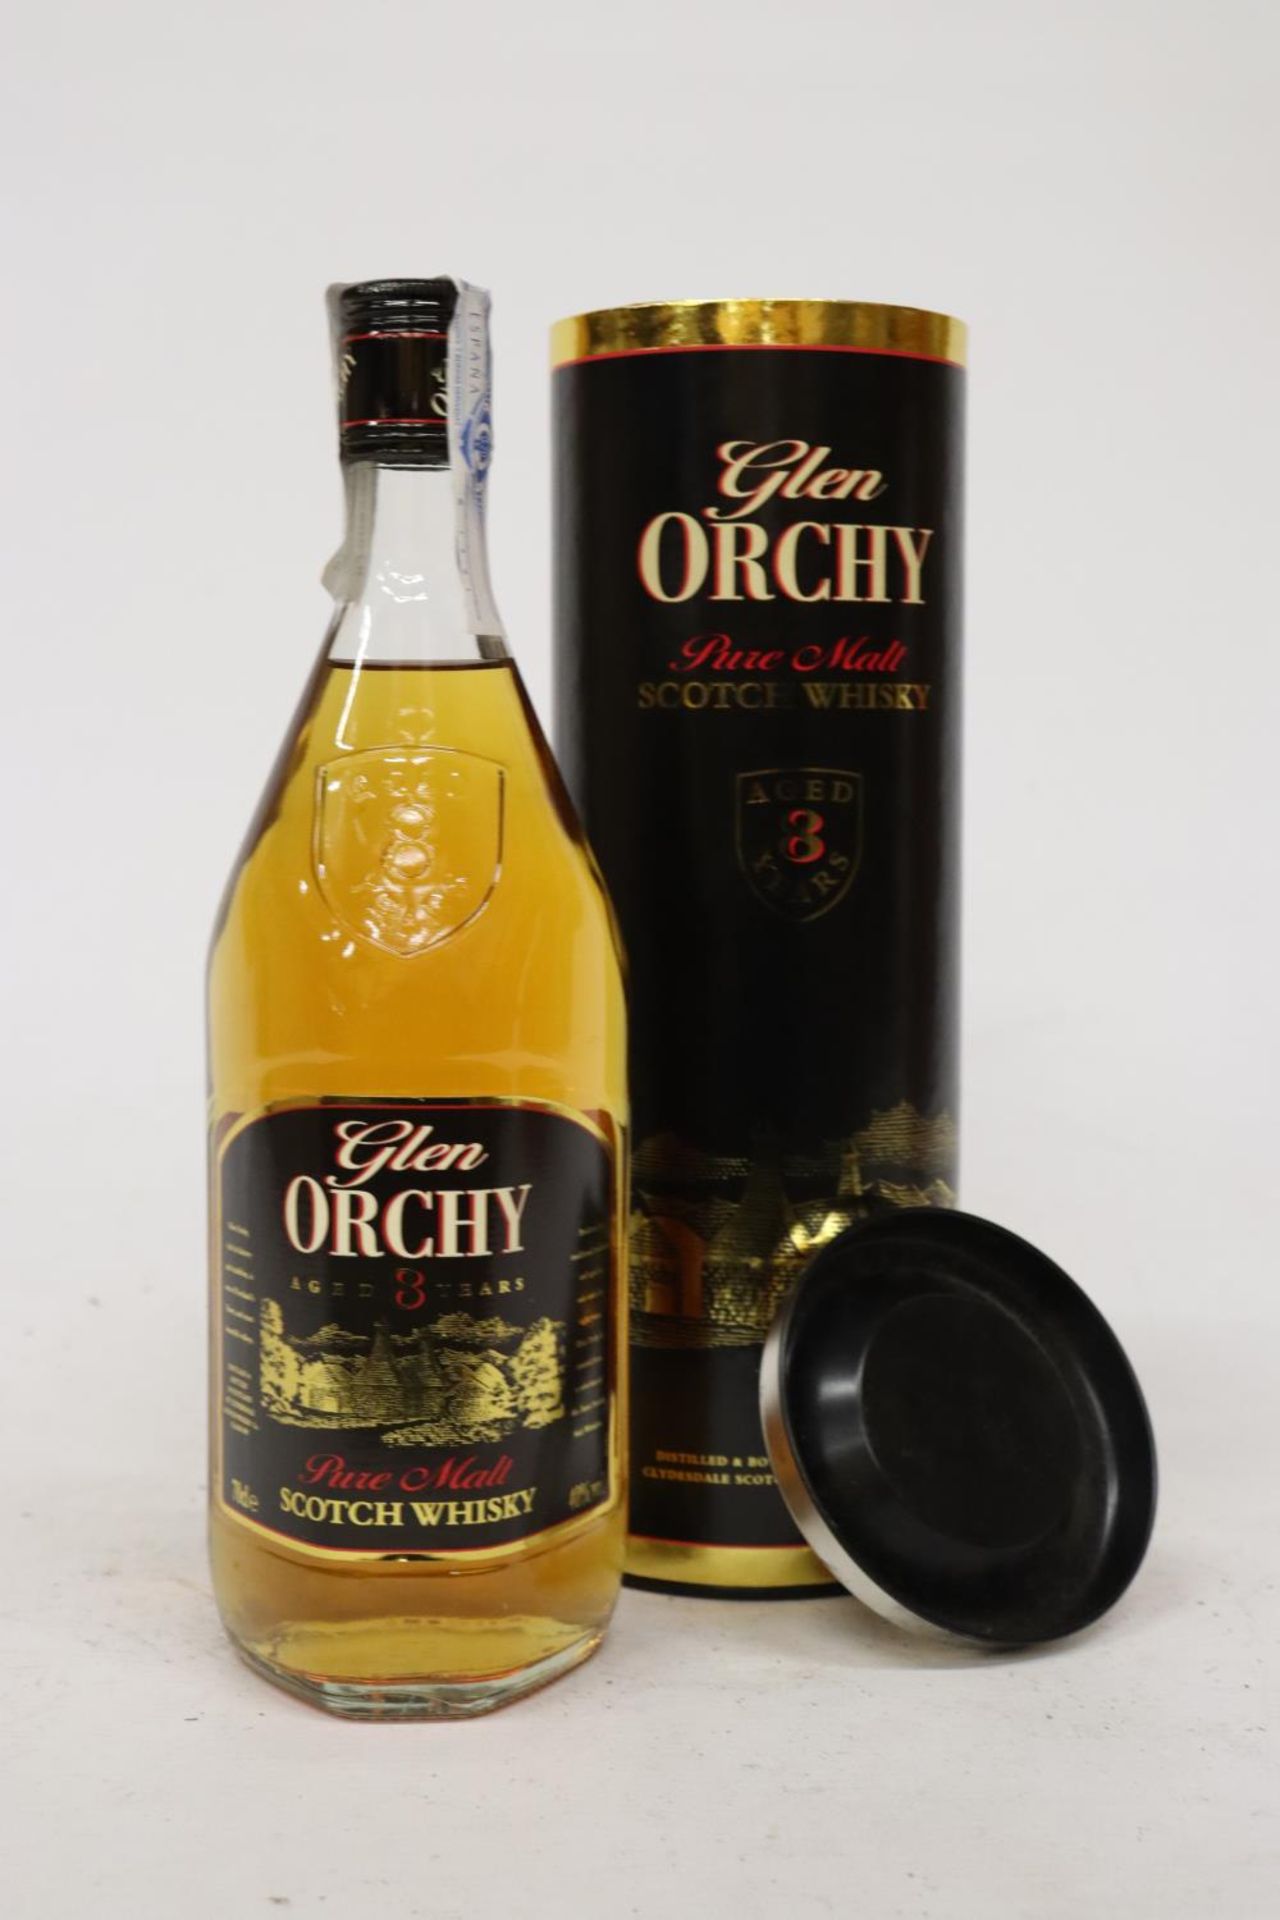 A BOXED BOTTLE OF GLEN ORCHY AGED EIGHT YEAR PURE MALT SCOTCH WHISKY - Image 4 of 5